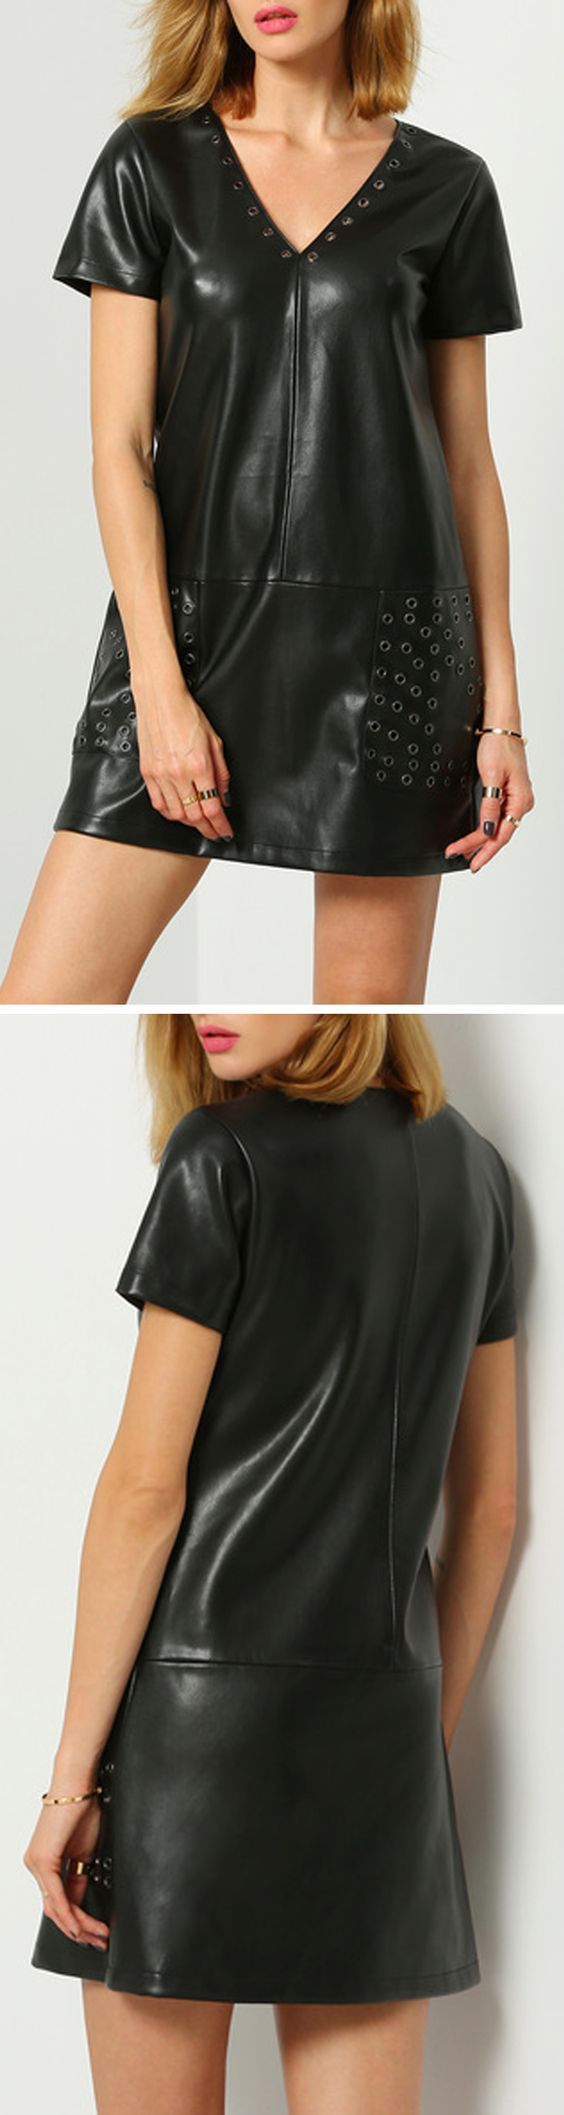 Black faux leather dress with eyelets